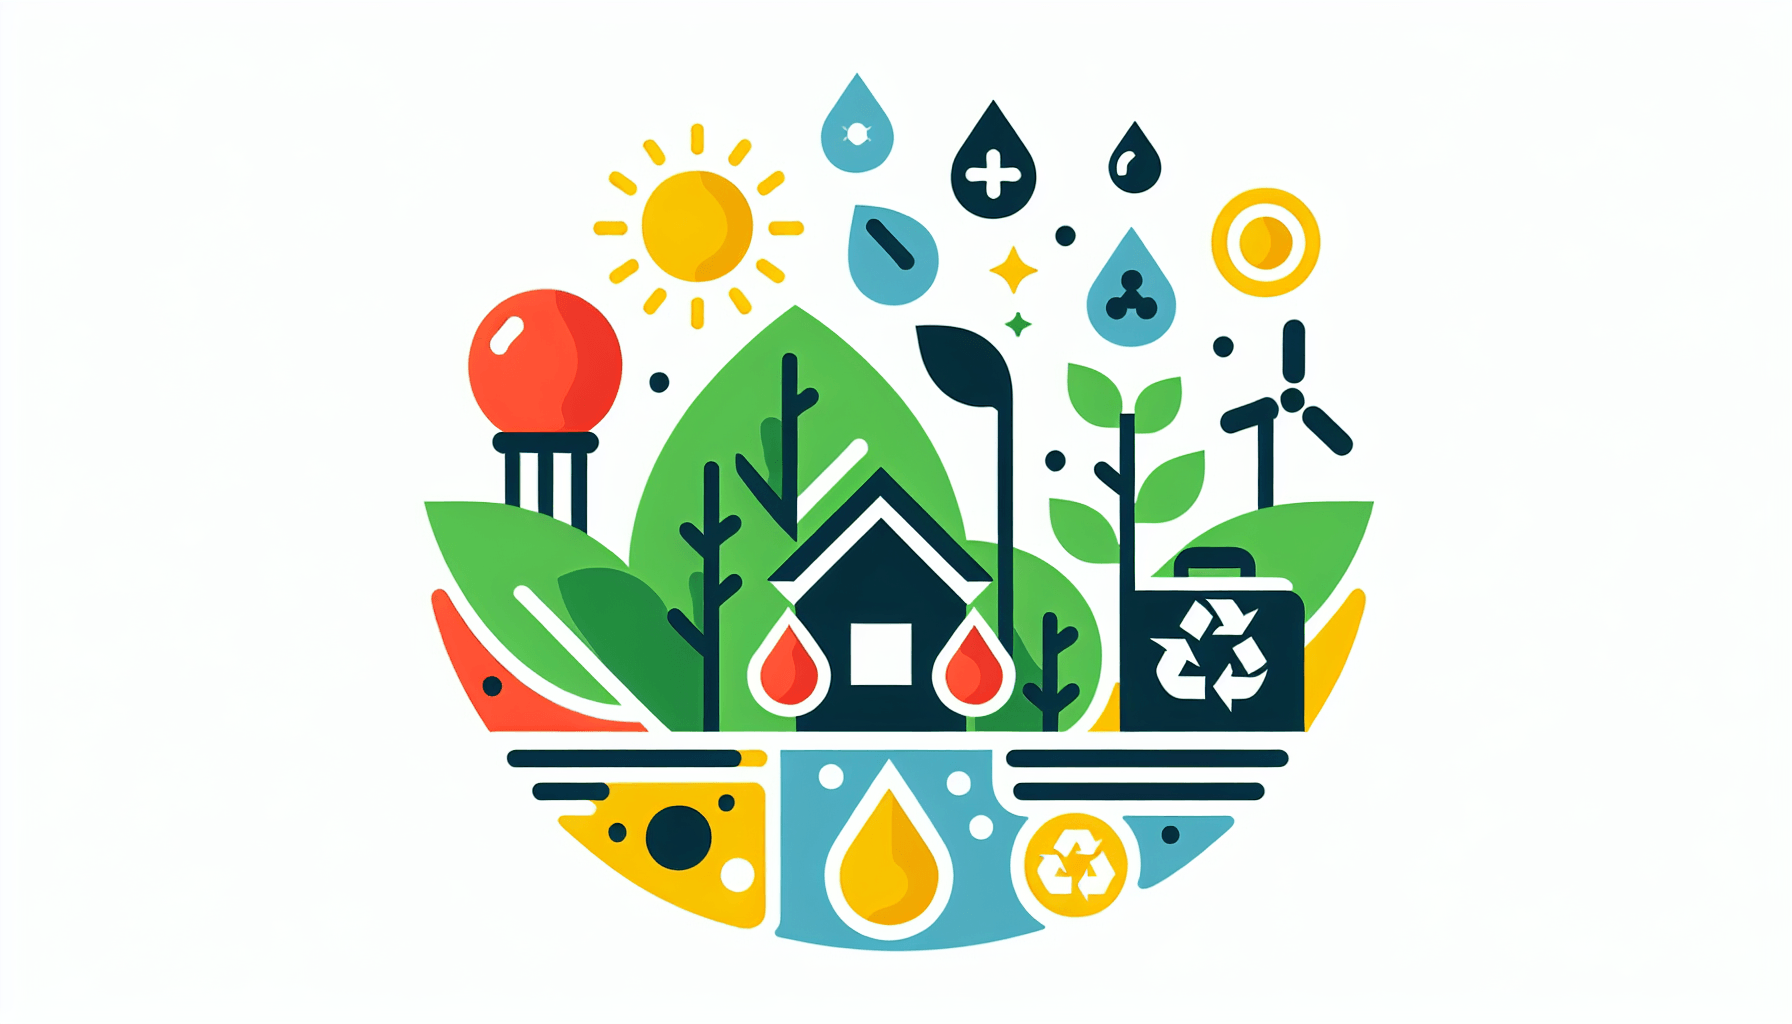 Sustainability in flat illustration style and white background, red #f47574, green #88c7a8, yellow #fcc44b, and blue #645bc8 colors.